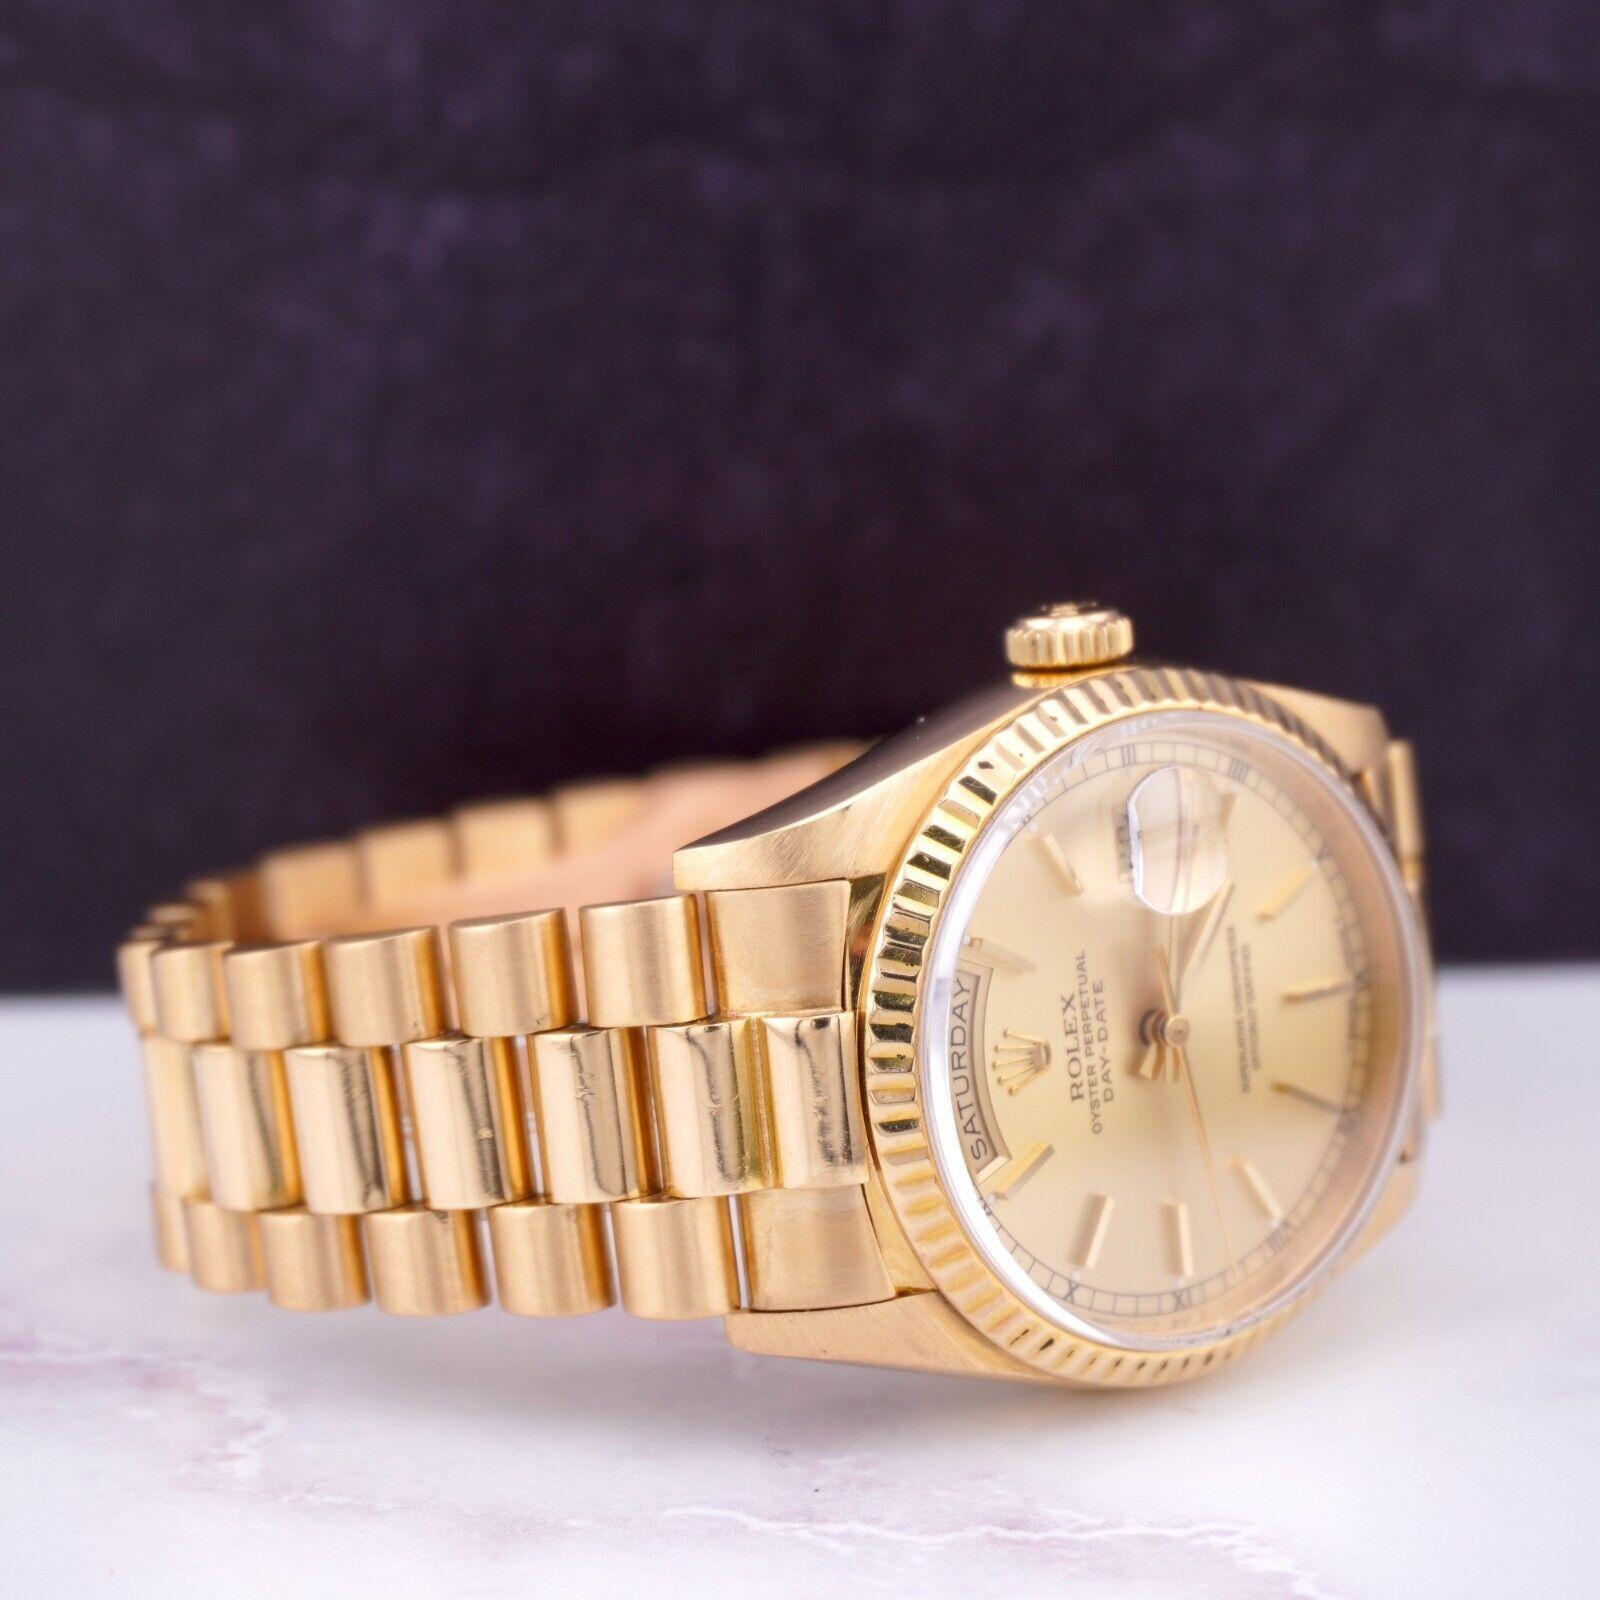 Rolex DAY-DATE 36mm 18K Yellow Gold President Men's Gold Dial Watch Ref: 18238 In Excellent Condition For Sale In Pleasanton, CA